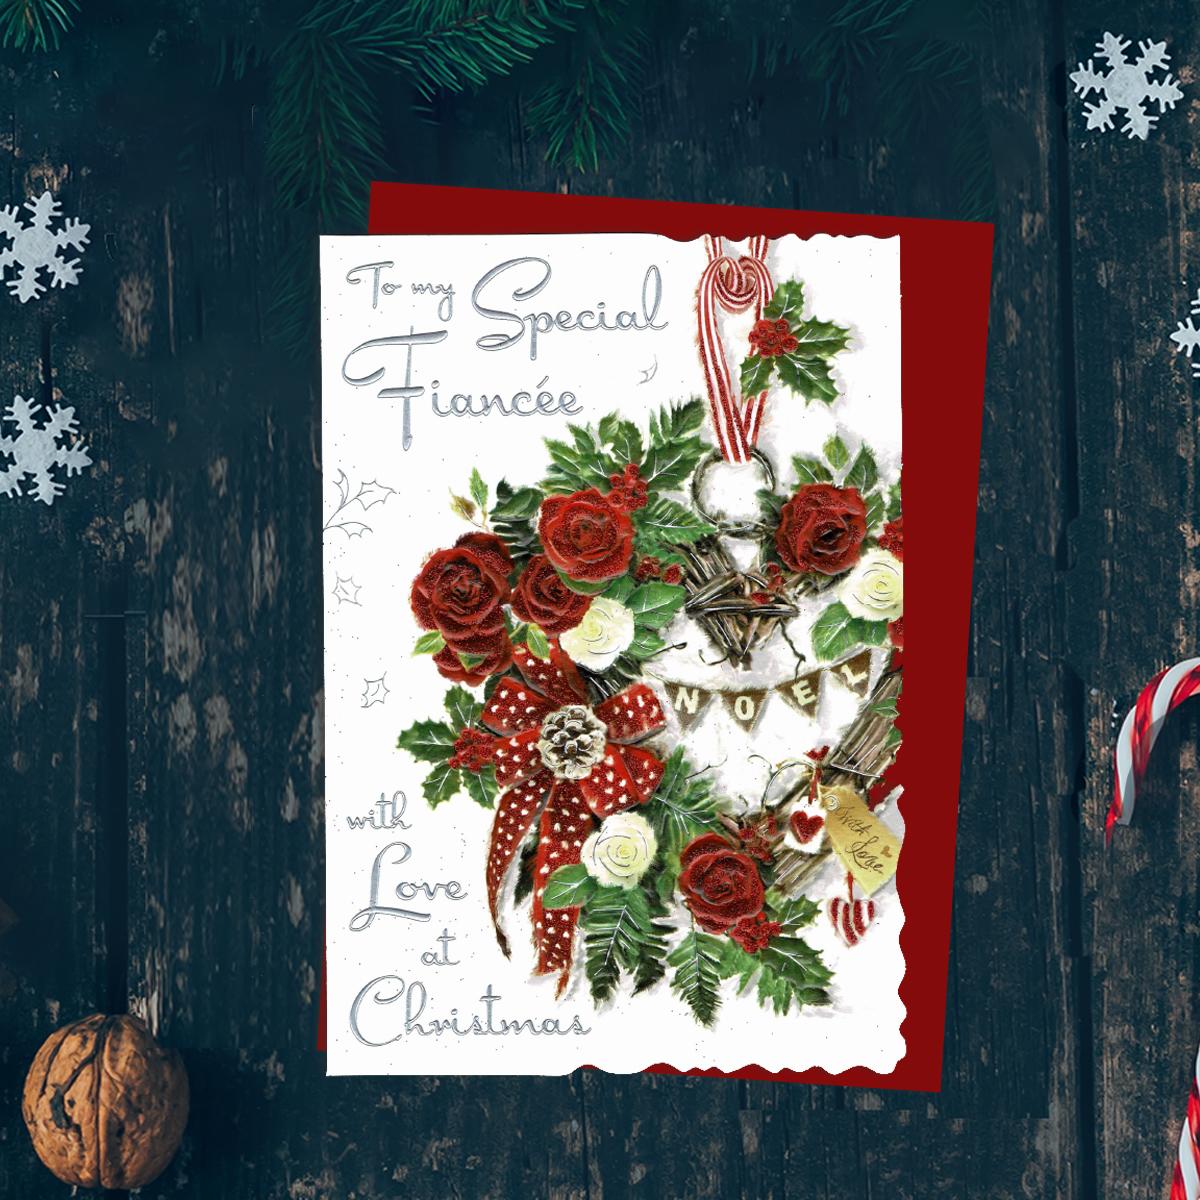 To My Special Fiancee With Love At Christmas Features A Beautiful  Wicker Heart Decorated With Roses, Ribbons And Cones. Finished With Silver Foil Lettering, Red Glitter And Red Envelope